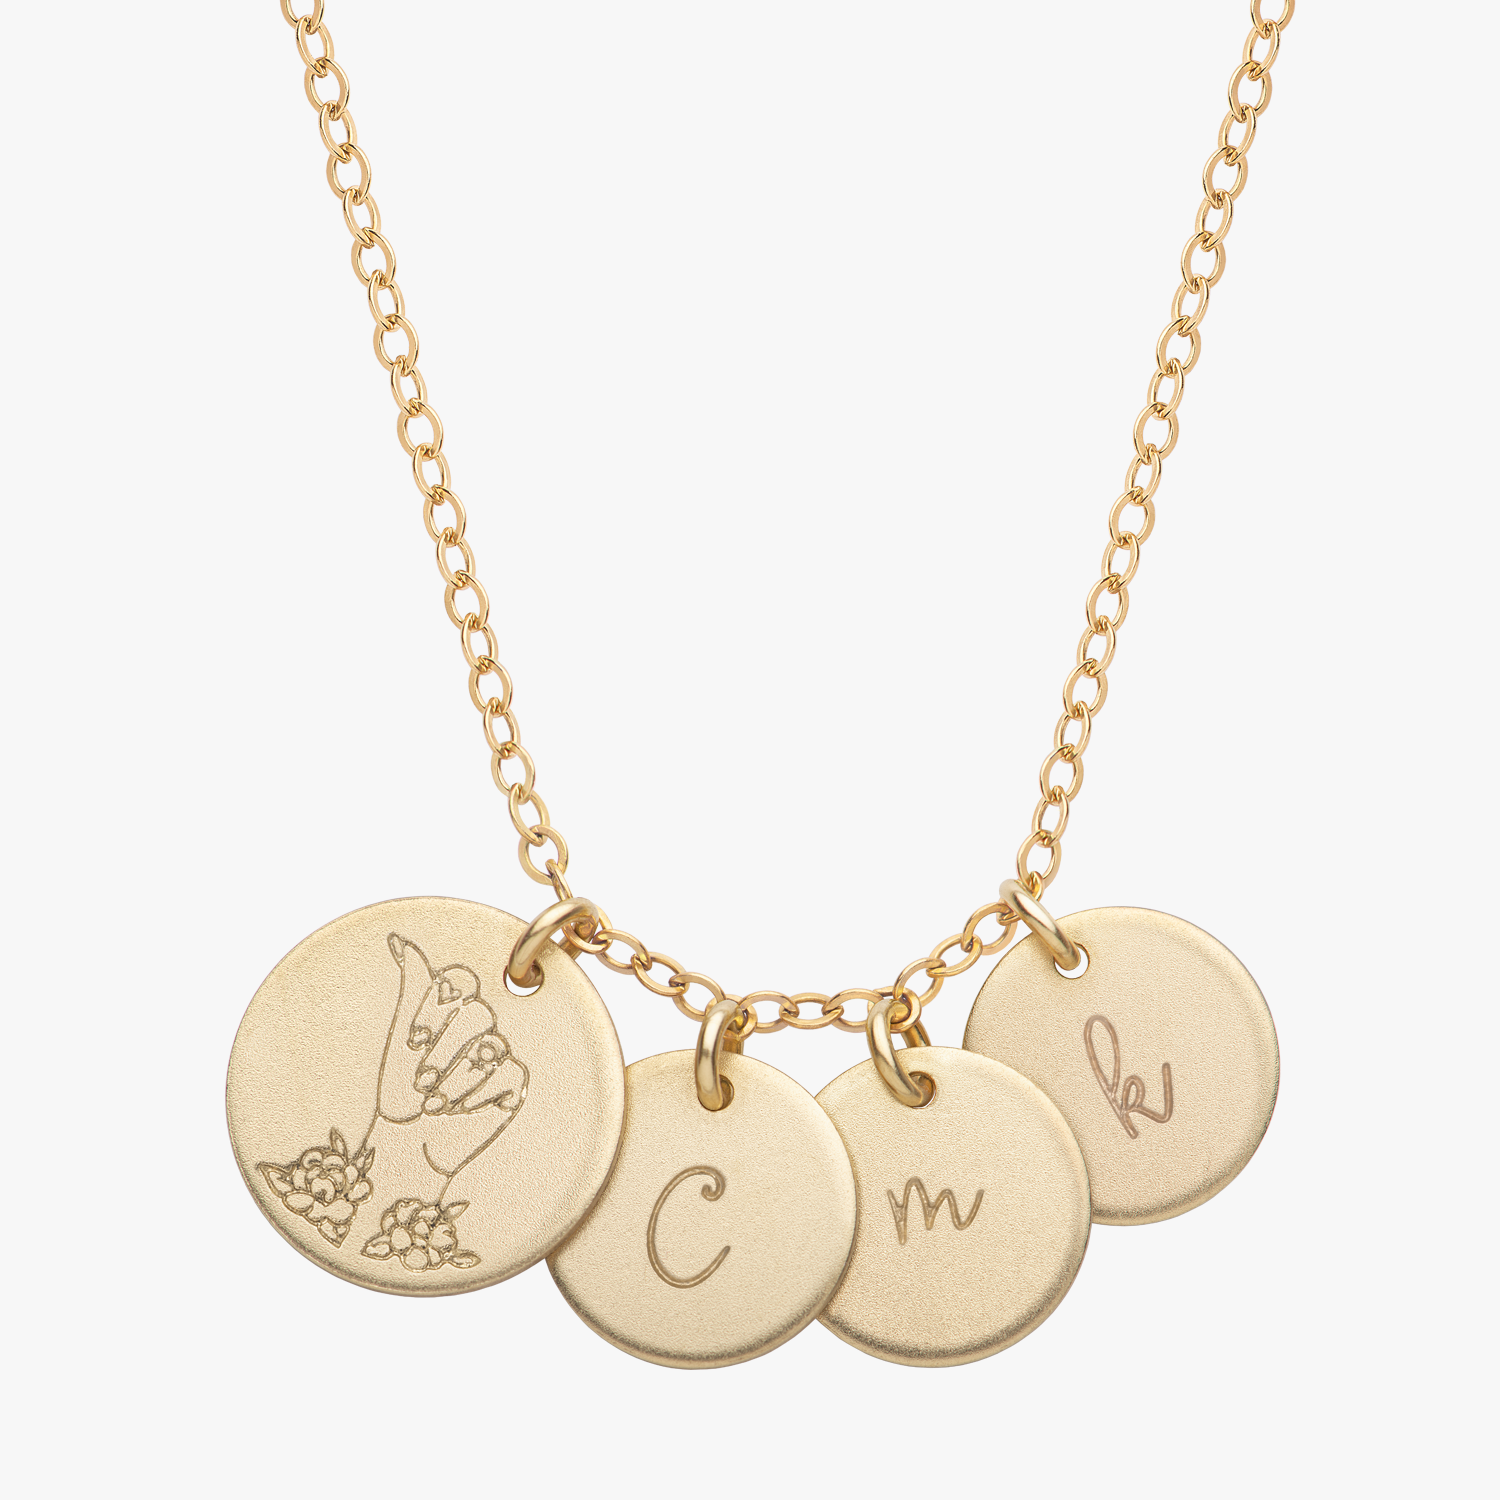 Personalized Empowerment Gold Necklace